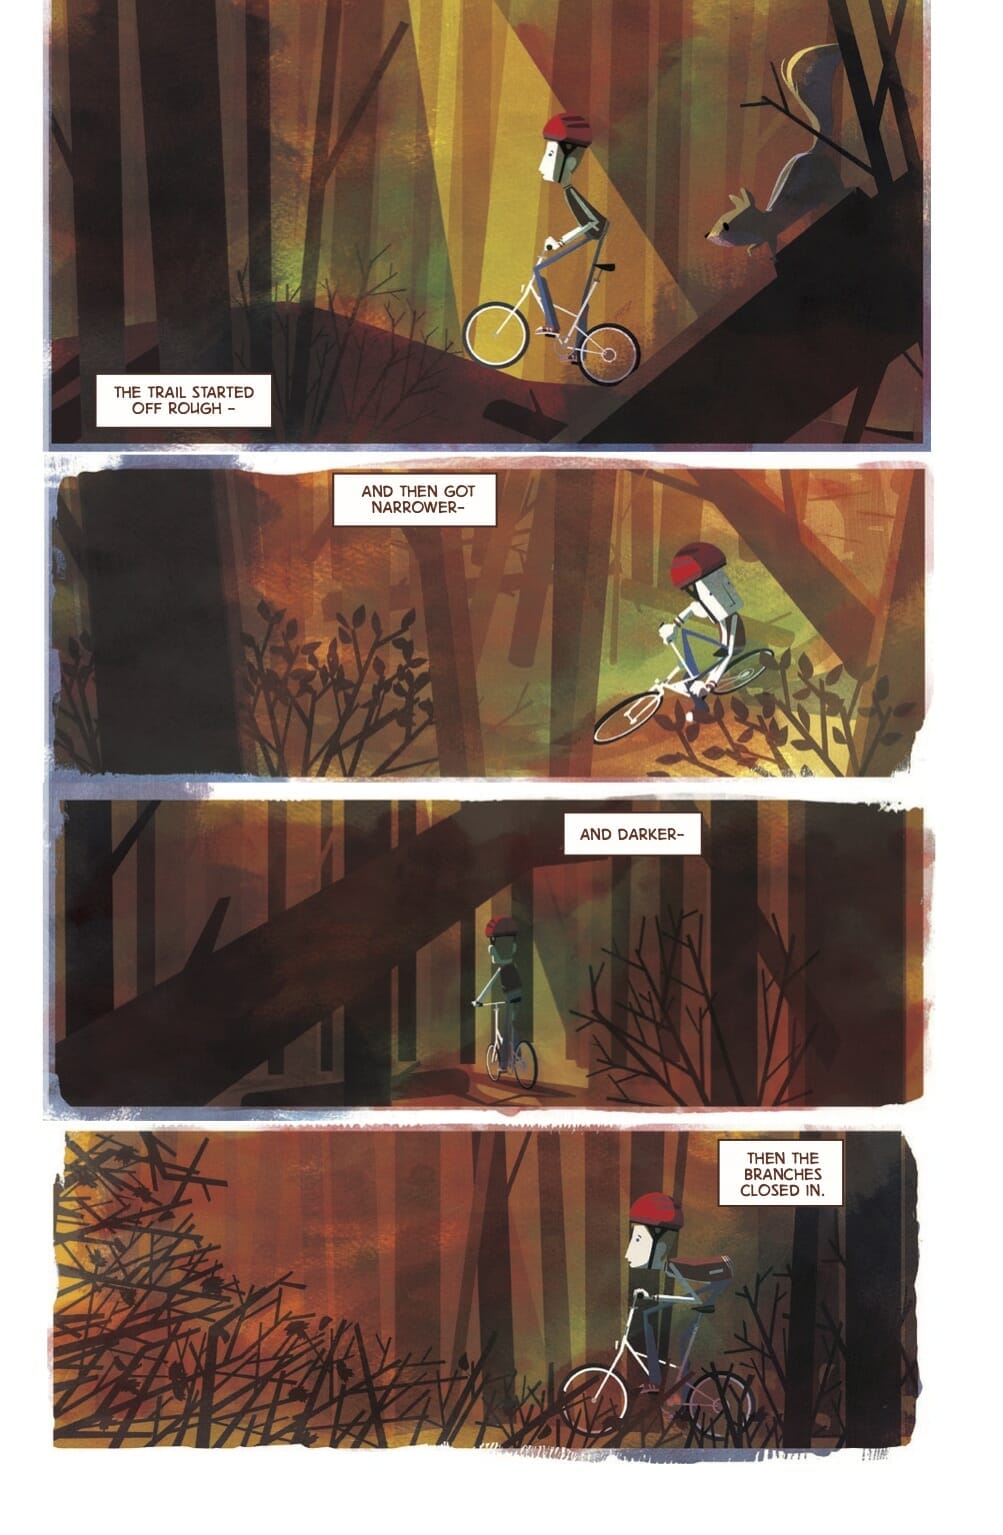 A review of The Junction comic